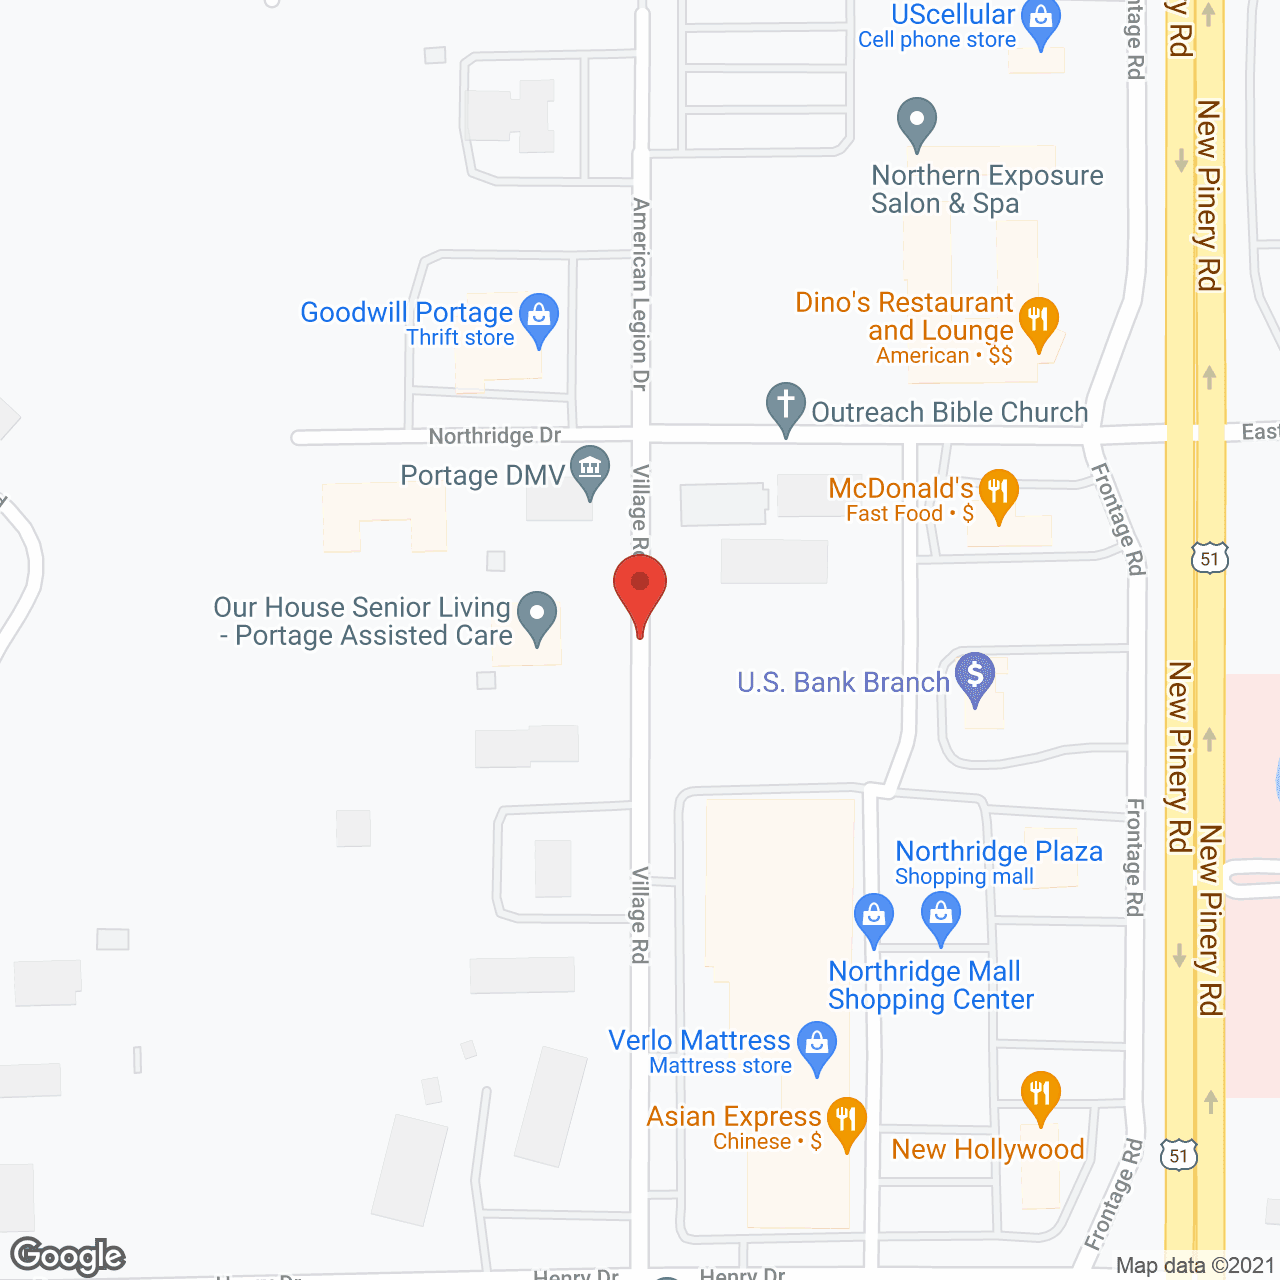 Our House Senior Living Assisted Care - Portage in google map